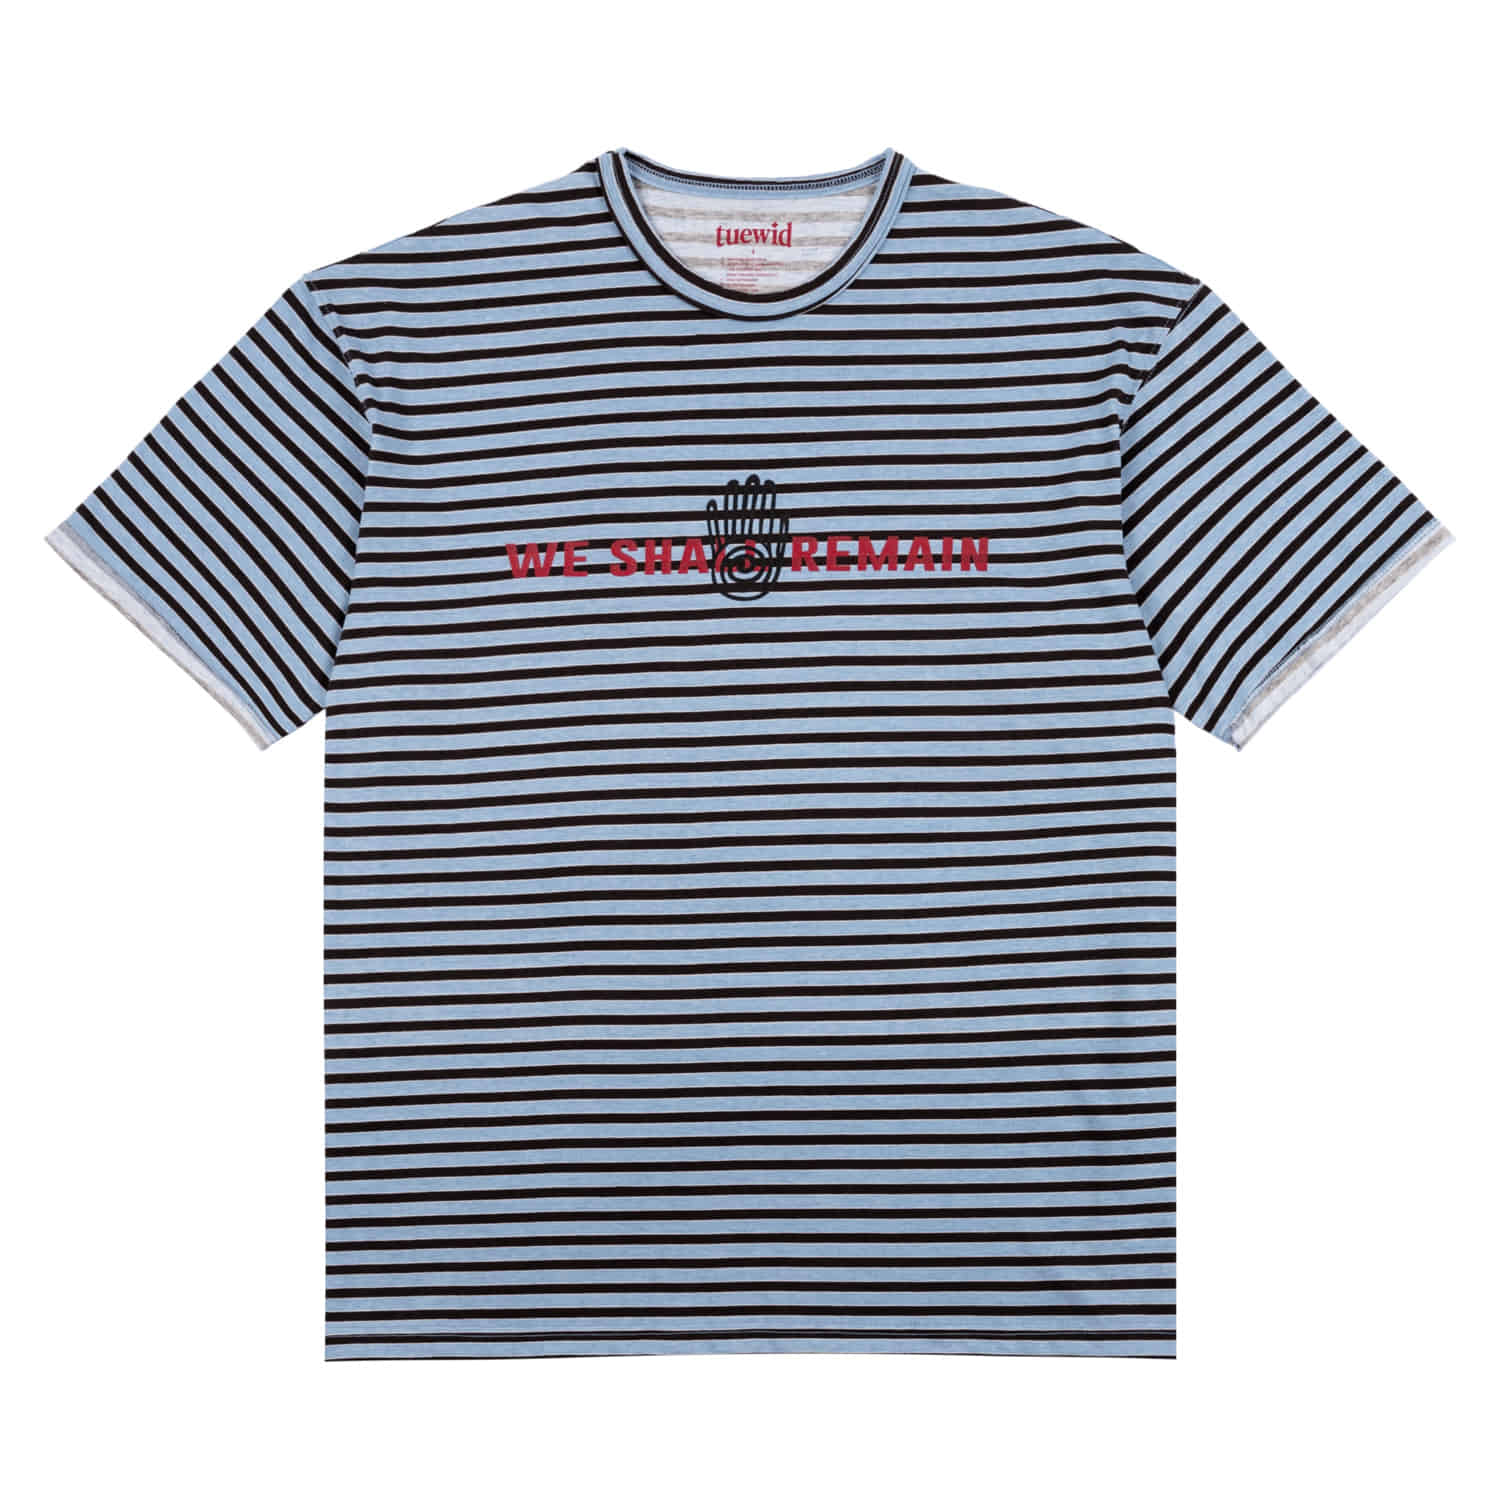 Tuewid oversized stripe t-shirts with pisces